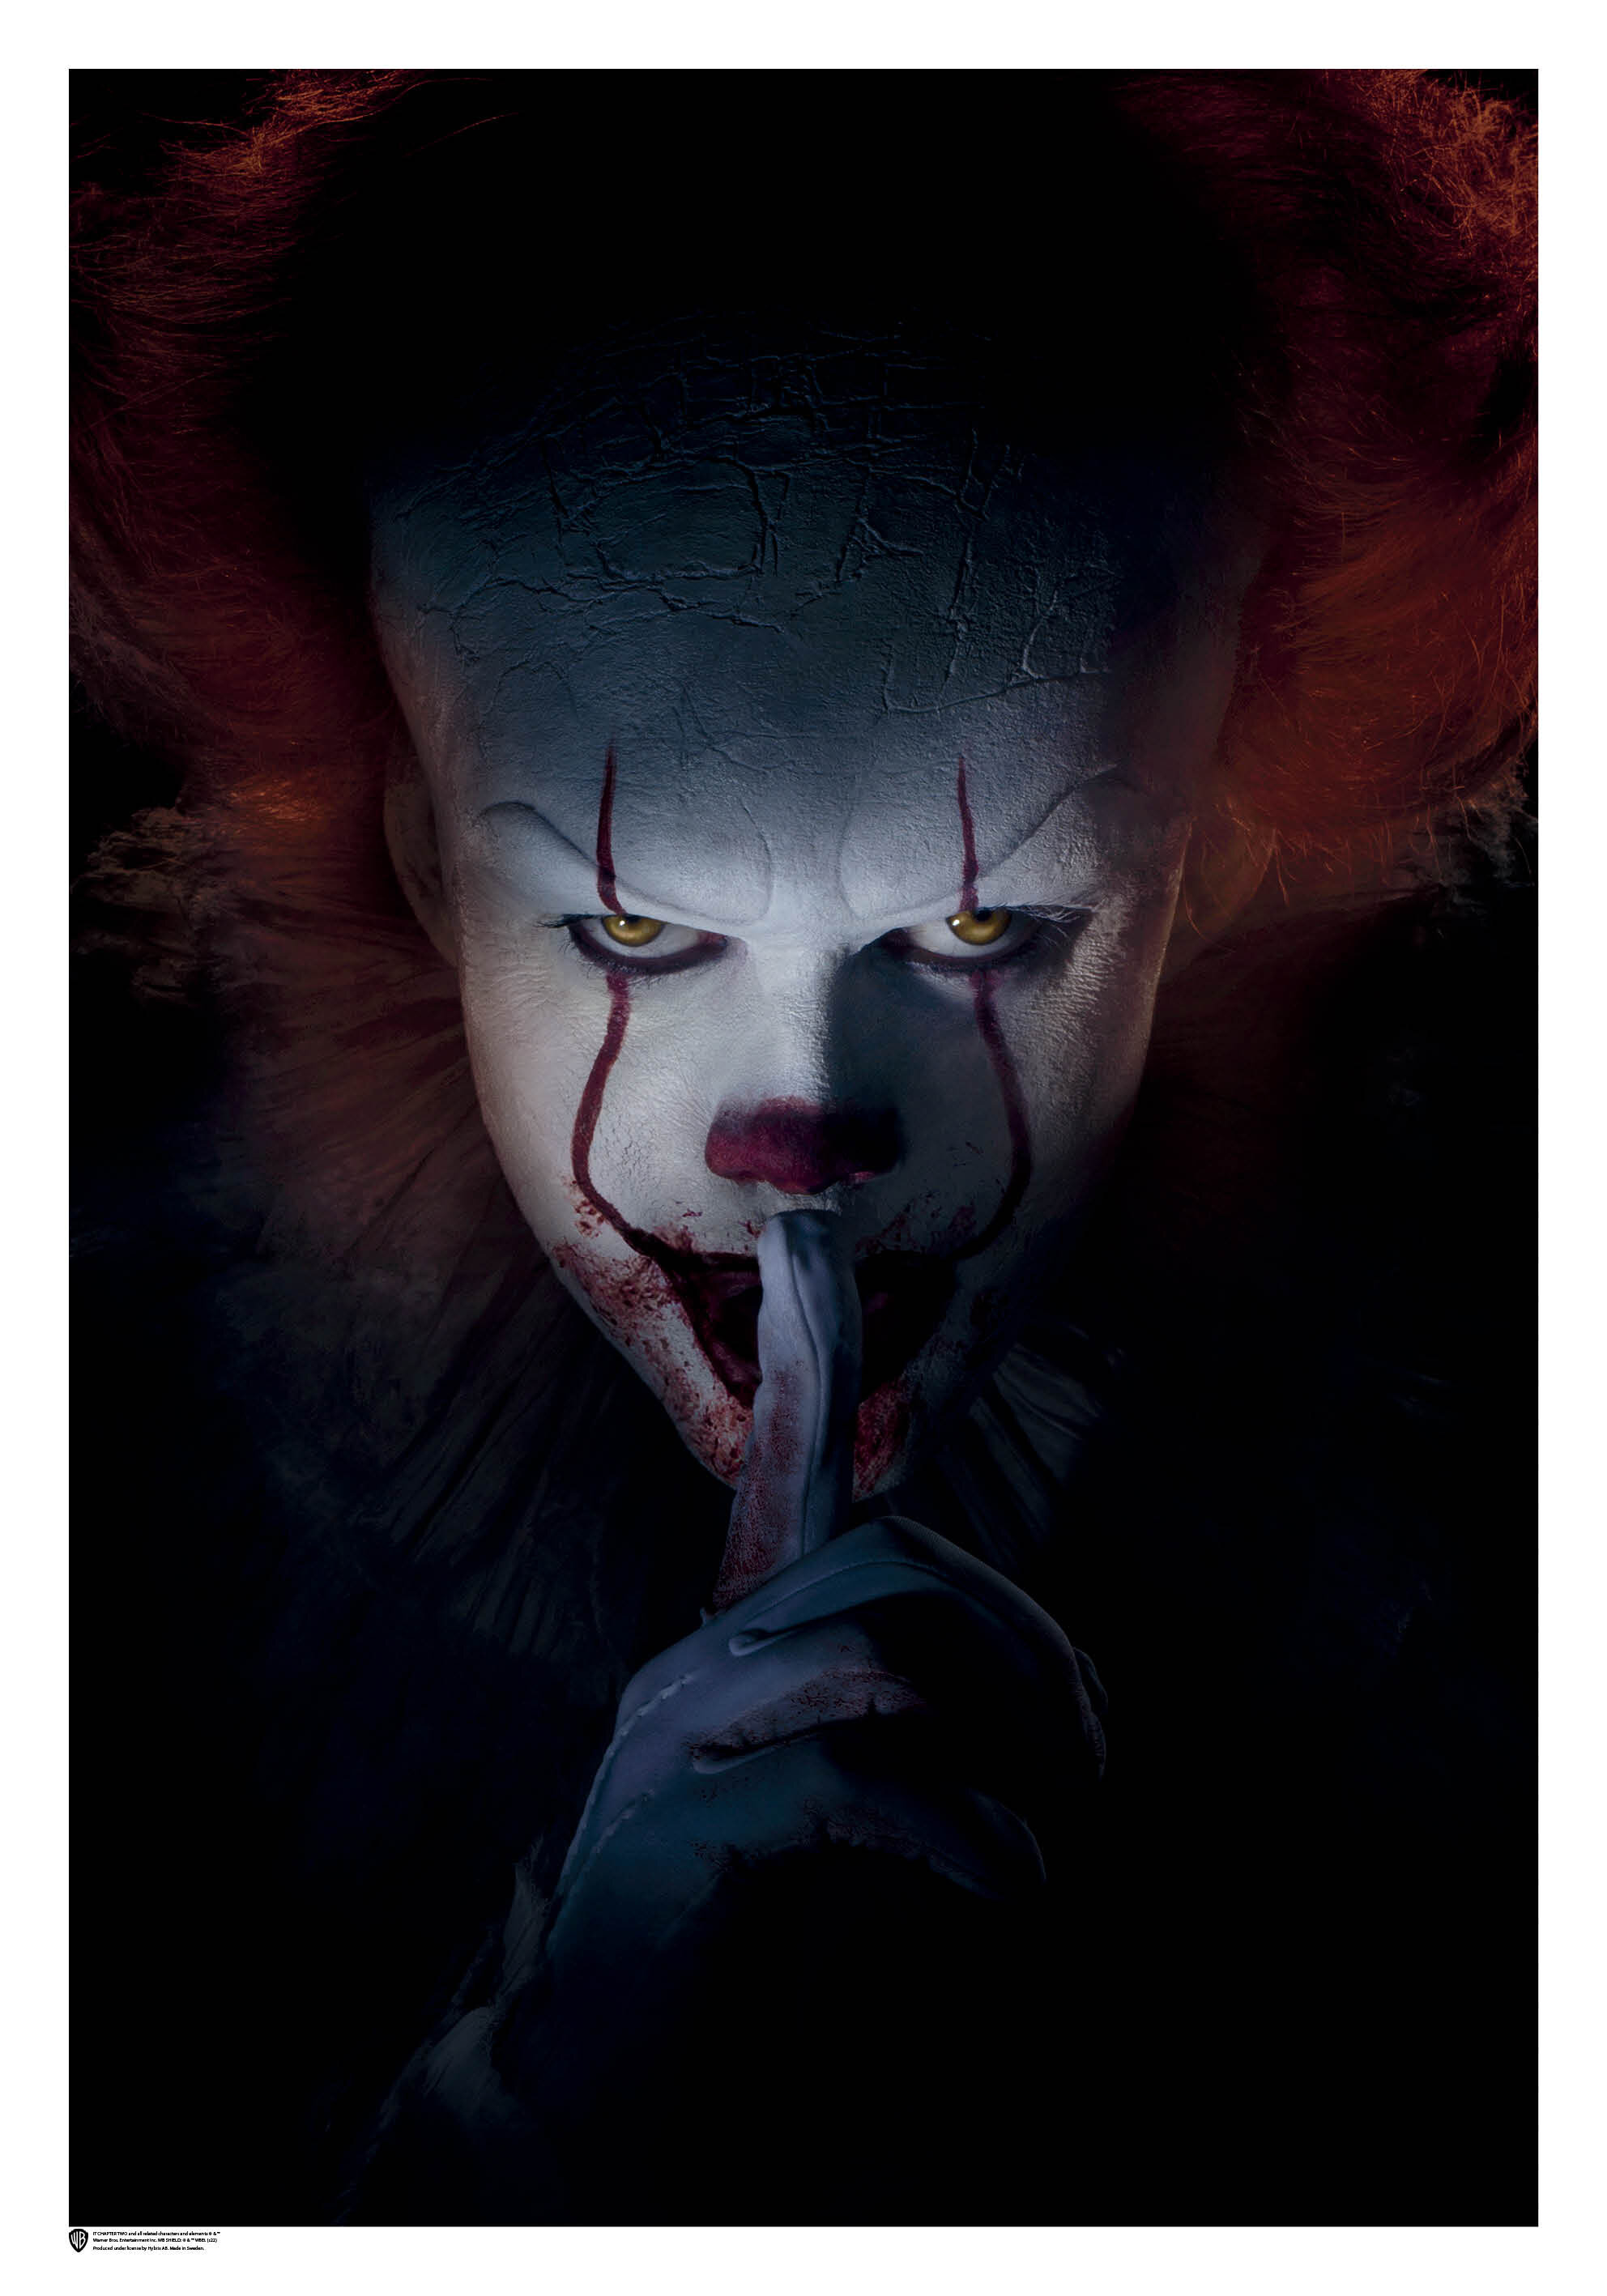 IT - Pennywise Says Sssshh Poster